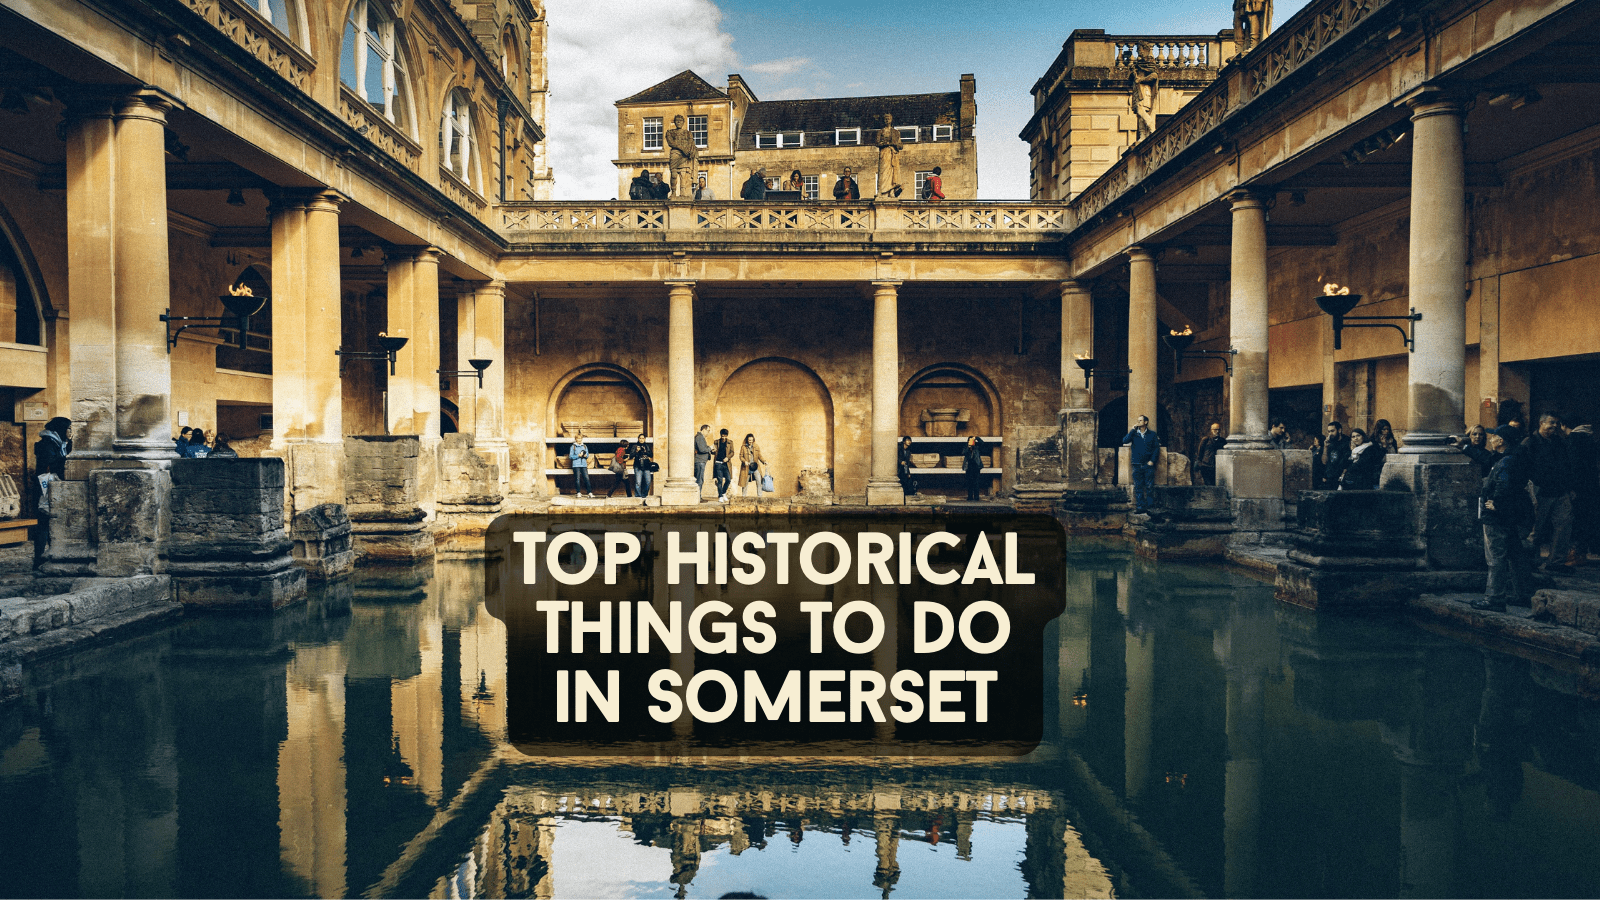 Things to do in somerset